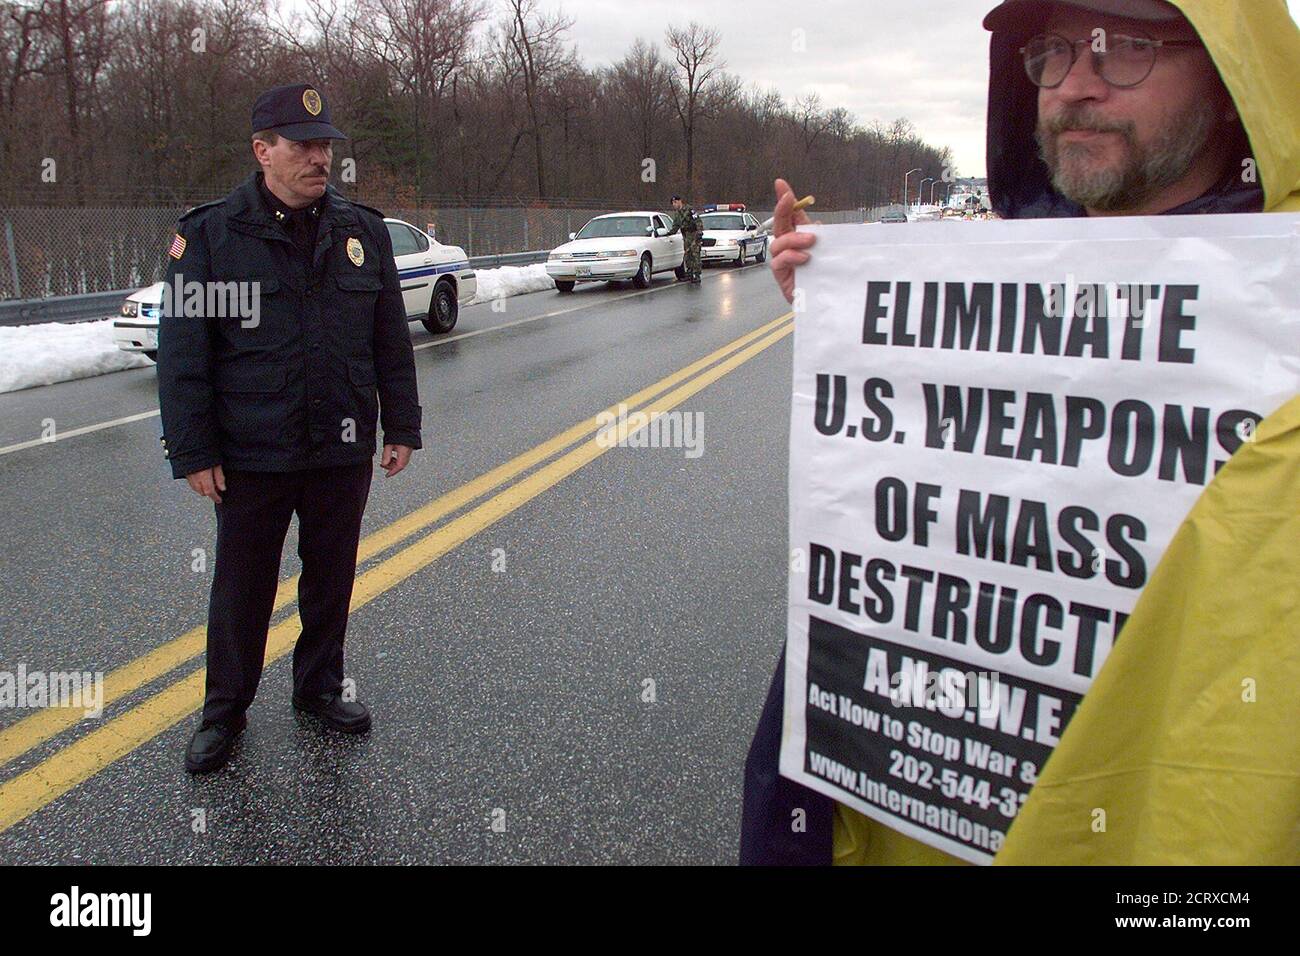 An anti-war protester stands outside the entrance to The Aberdeen Proving Grounds, the U.S. military facility that tests and develops chemical weapons, February 23, 2003. Authorities turned the group away. REUTERS/Brendan McDermid  BM/ME Stock Photo